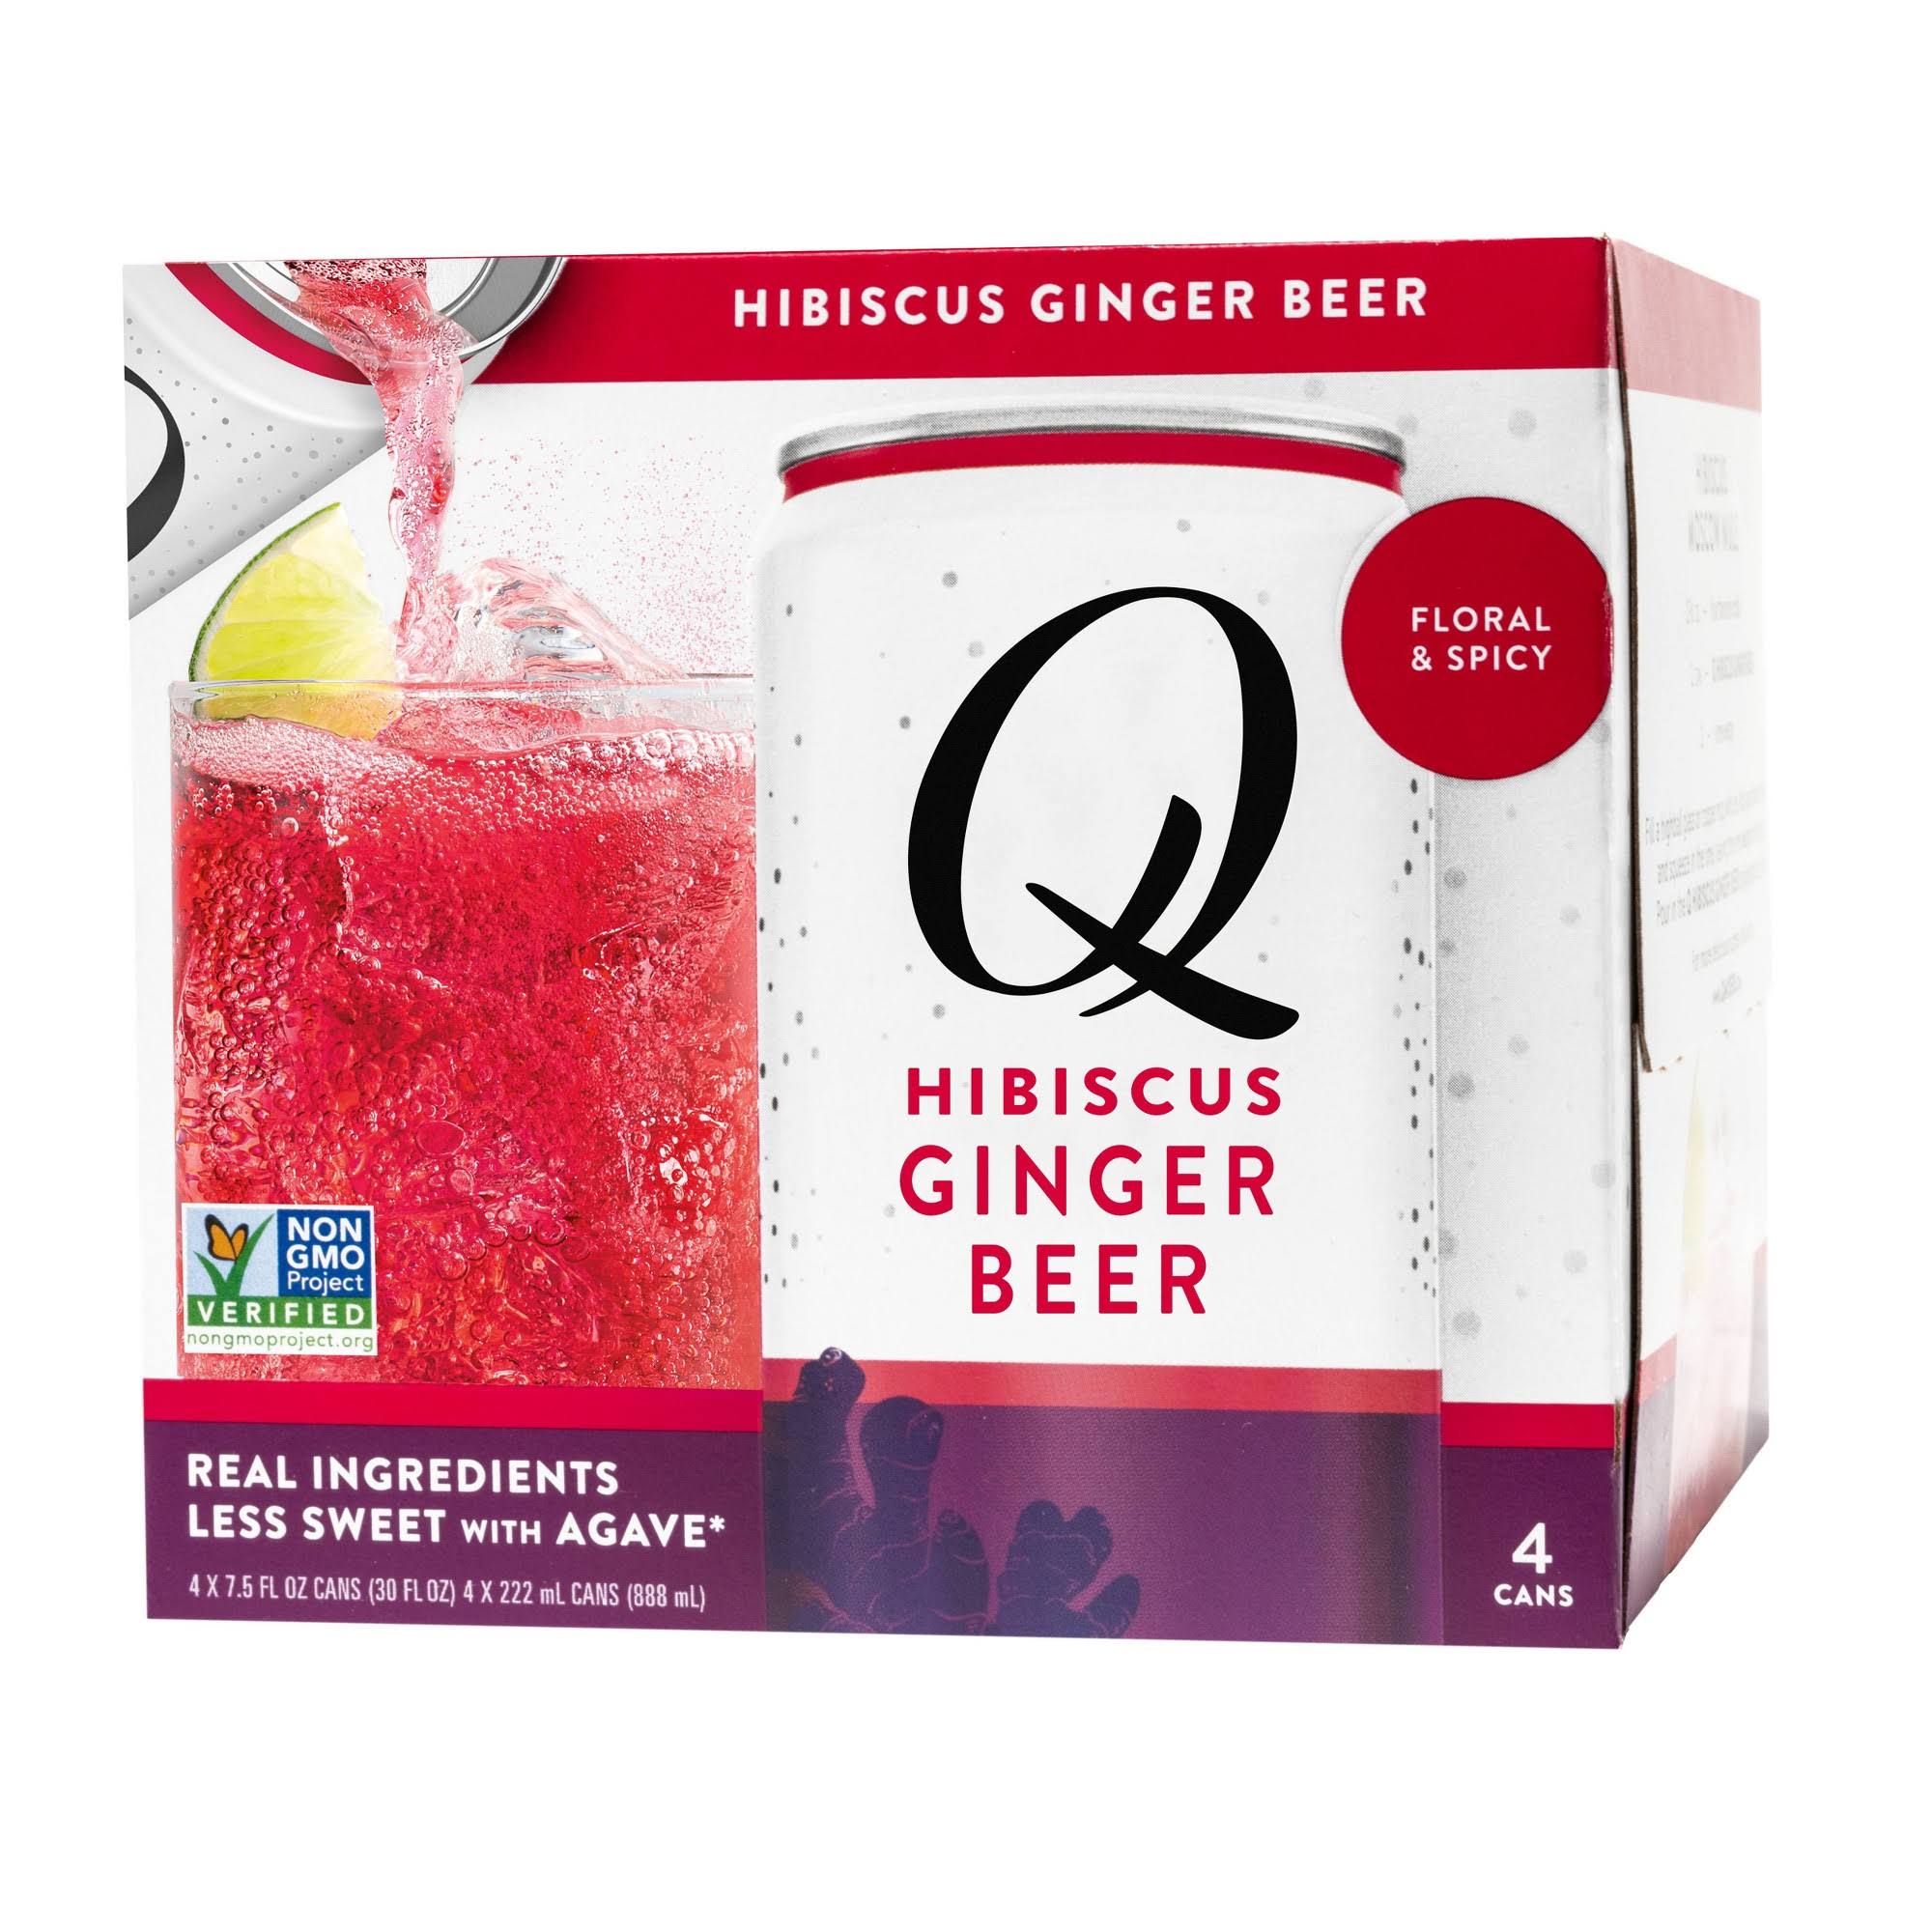 Q Ginger Beer, Hibiscus, Floral & Spicy - 4 pack, 7.5 fl oz cans